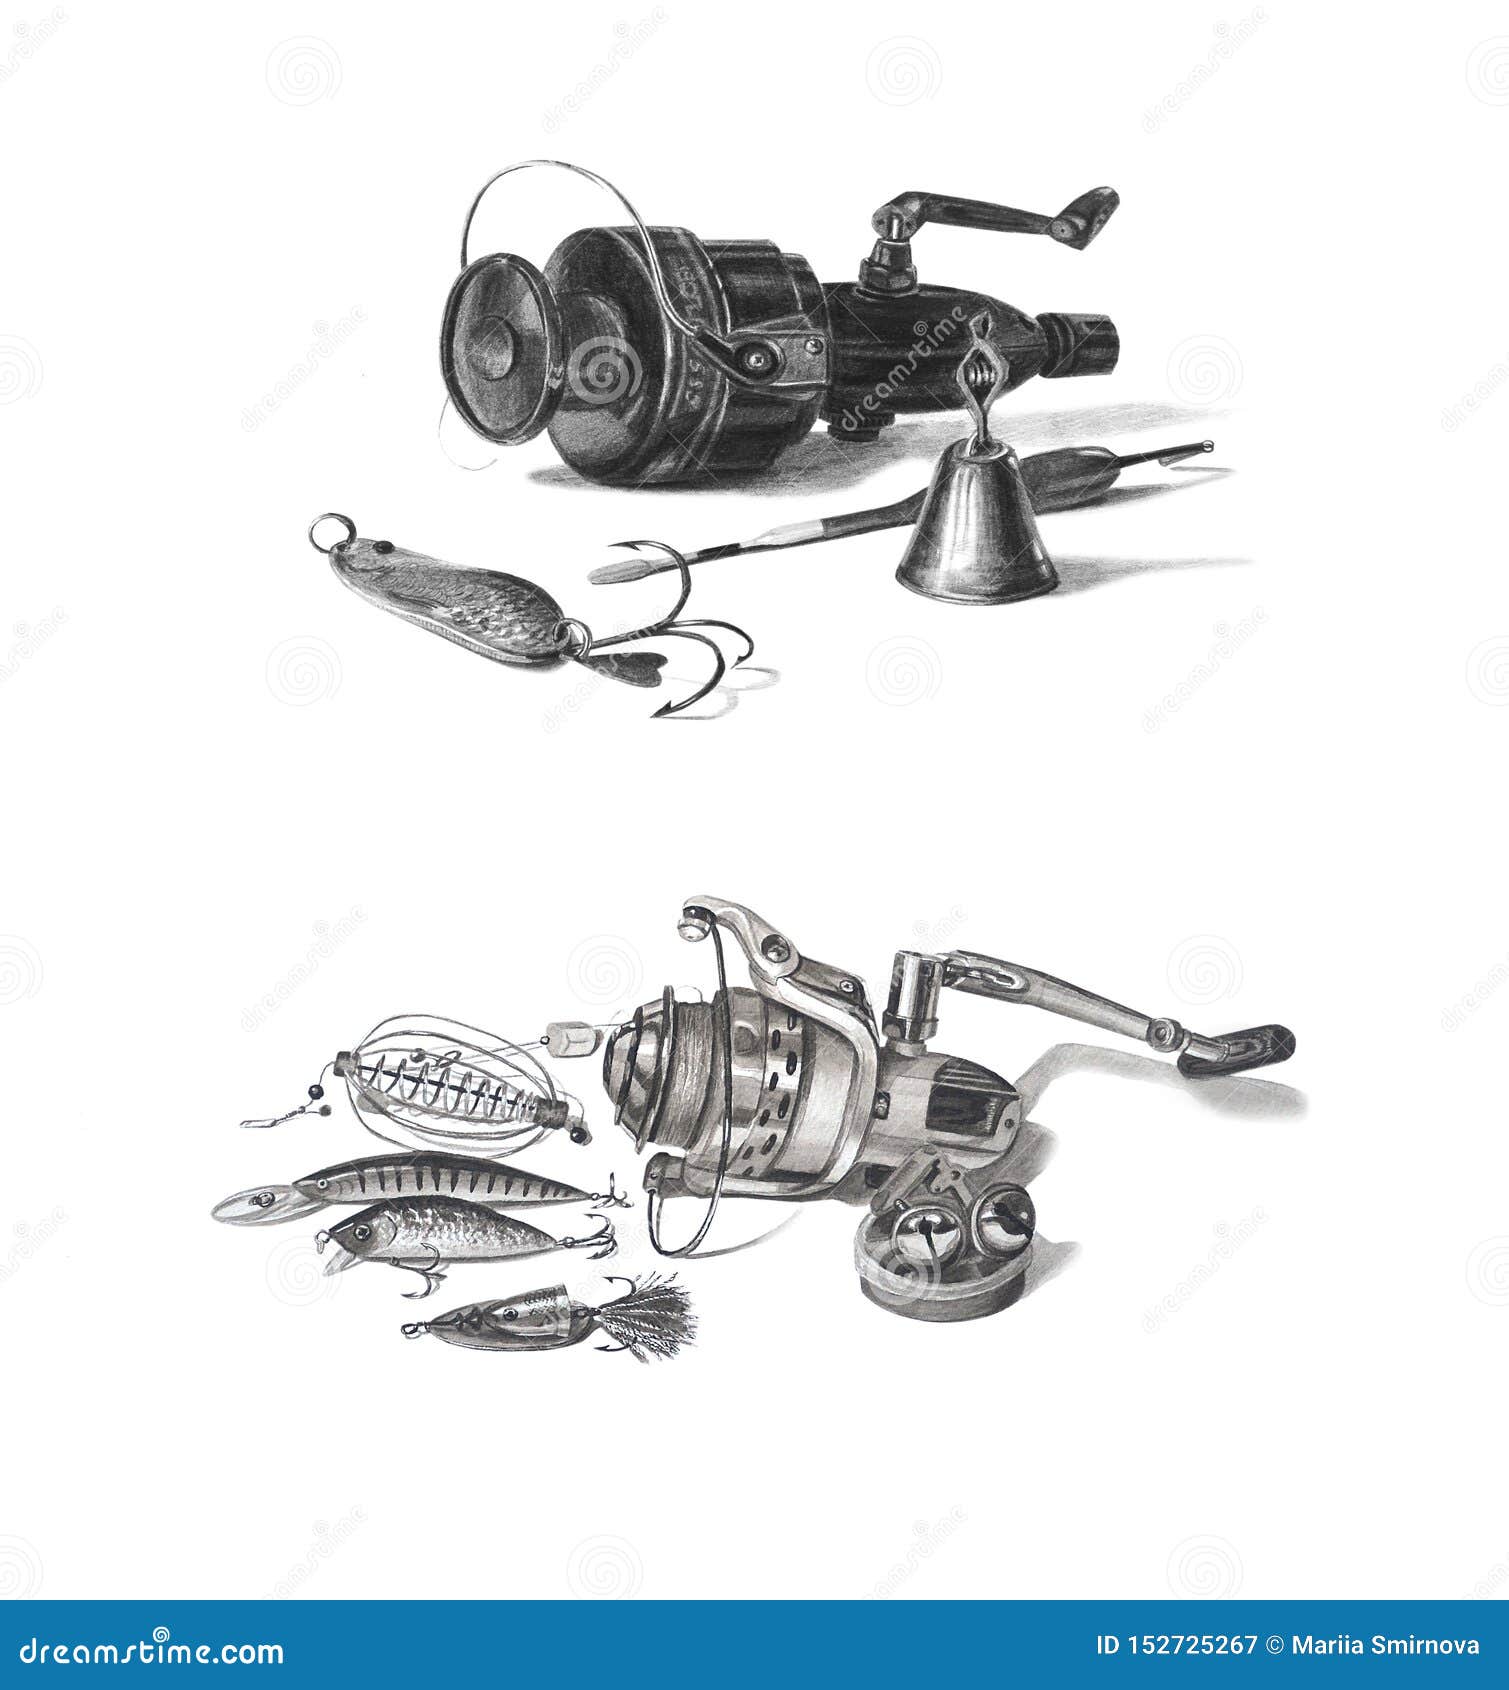 https://thumbs.dreamstime.com/z/beautifully-hand-drawn-fishing-gear-isolated-white-fishing-reel-bell-floats-hooks-bait-fishing-spinning-beautifully-hand-152725267.jpg